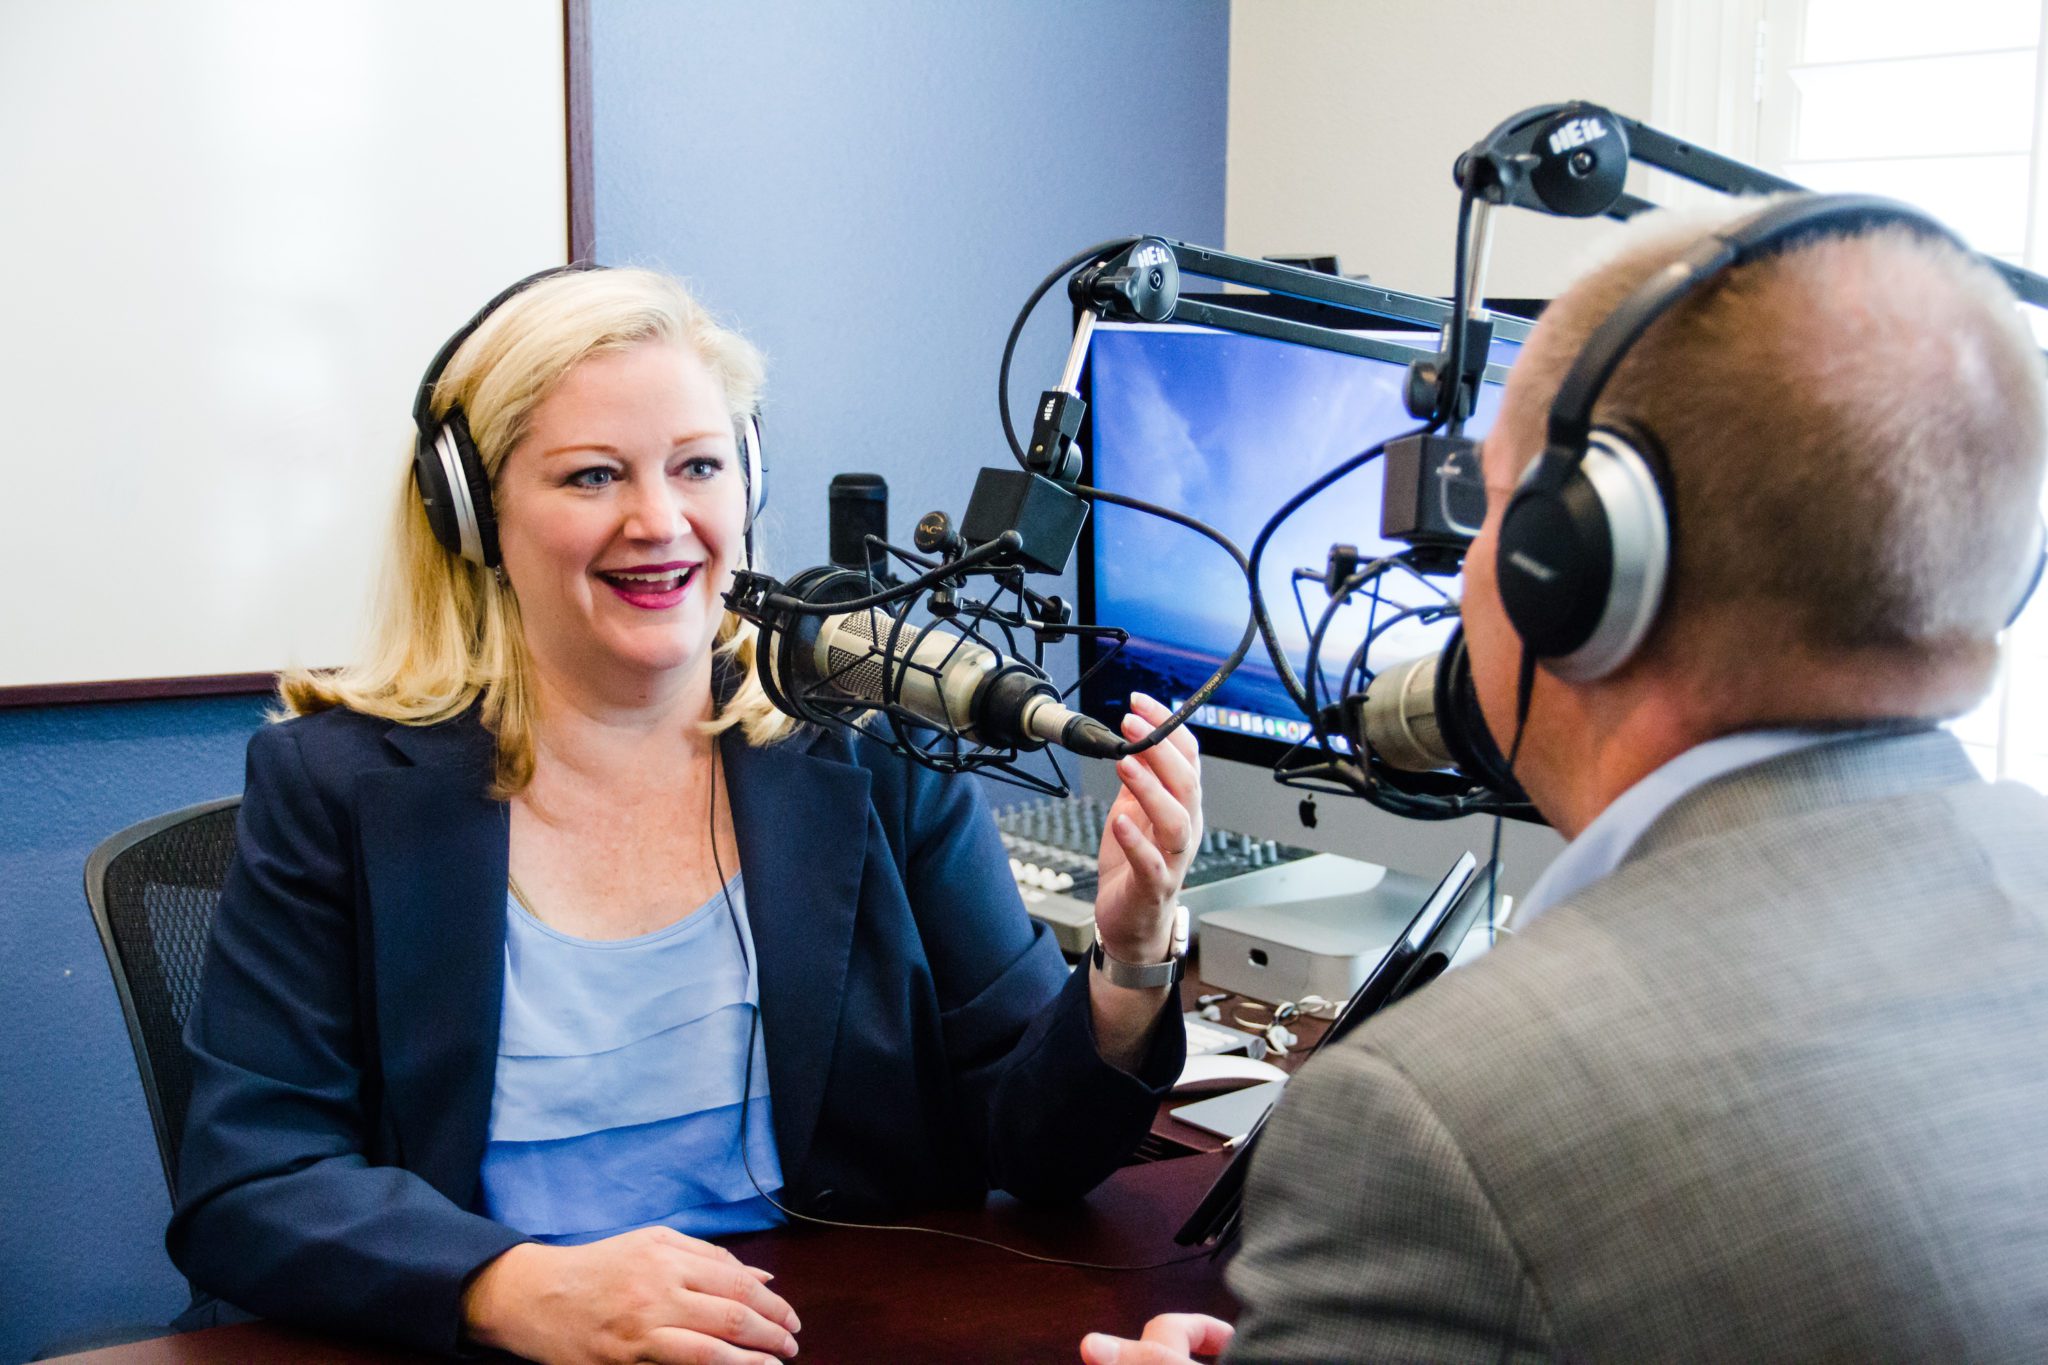 Bonni Stachowiak, host of "Teaching in Higher Ed" recording her podcast